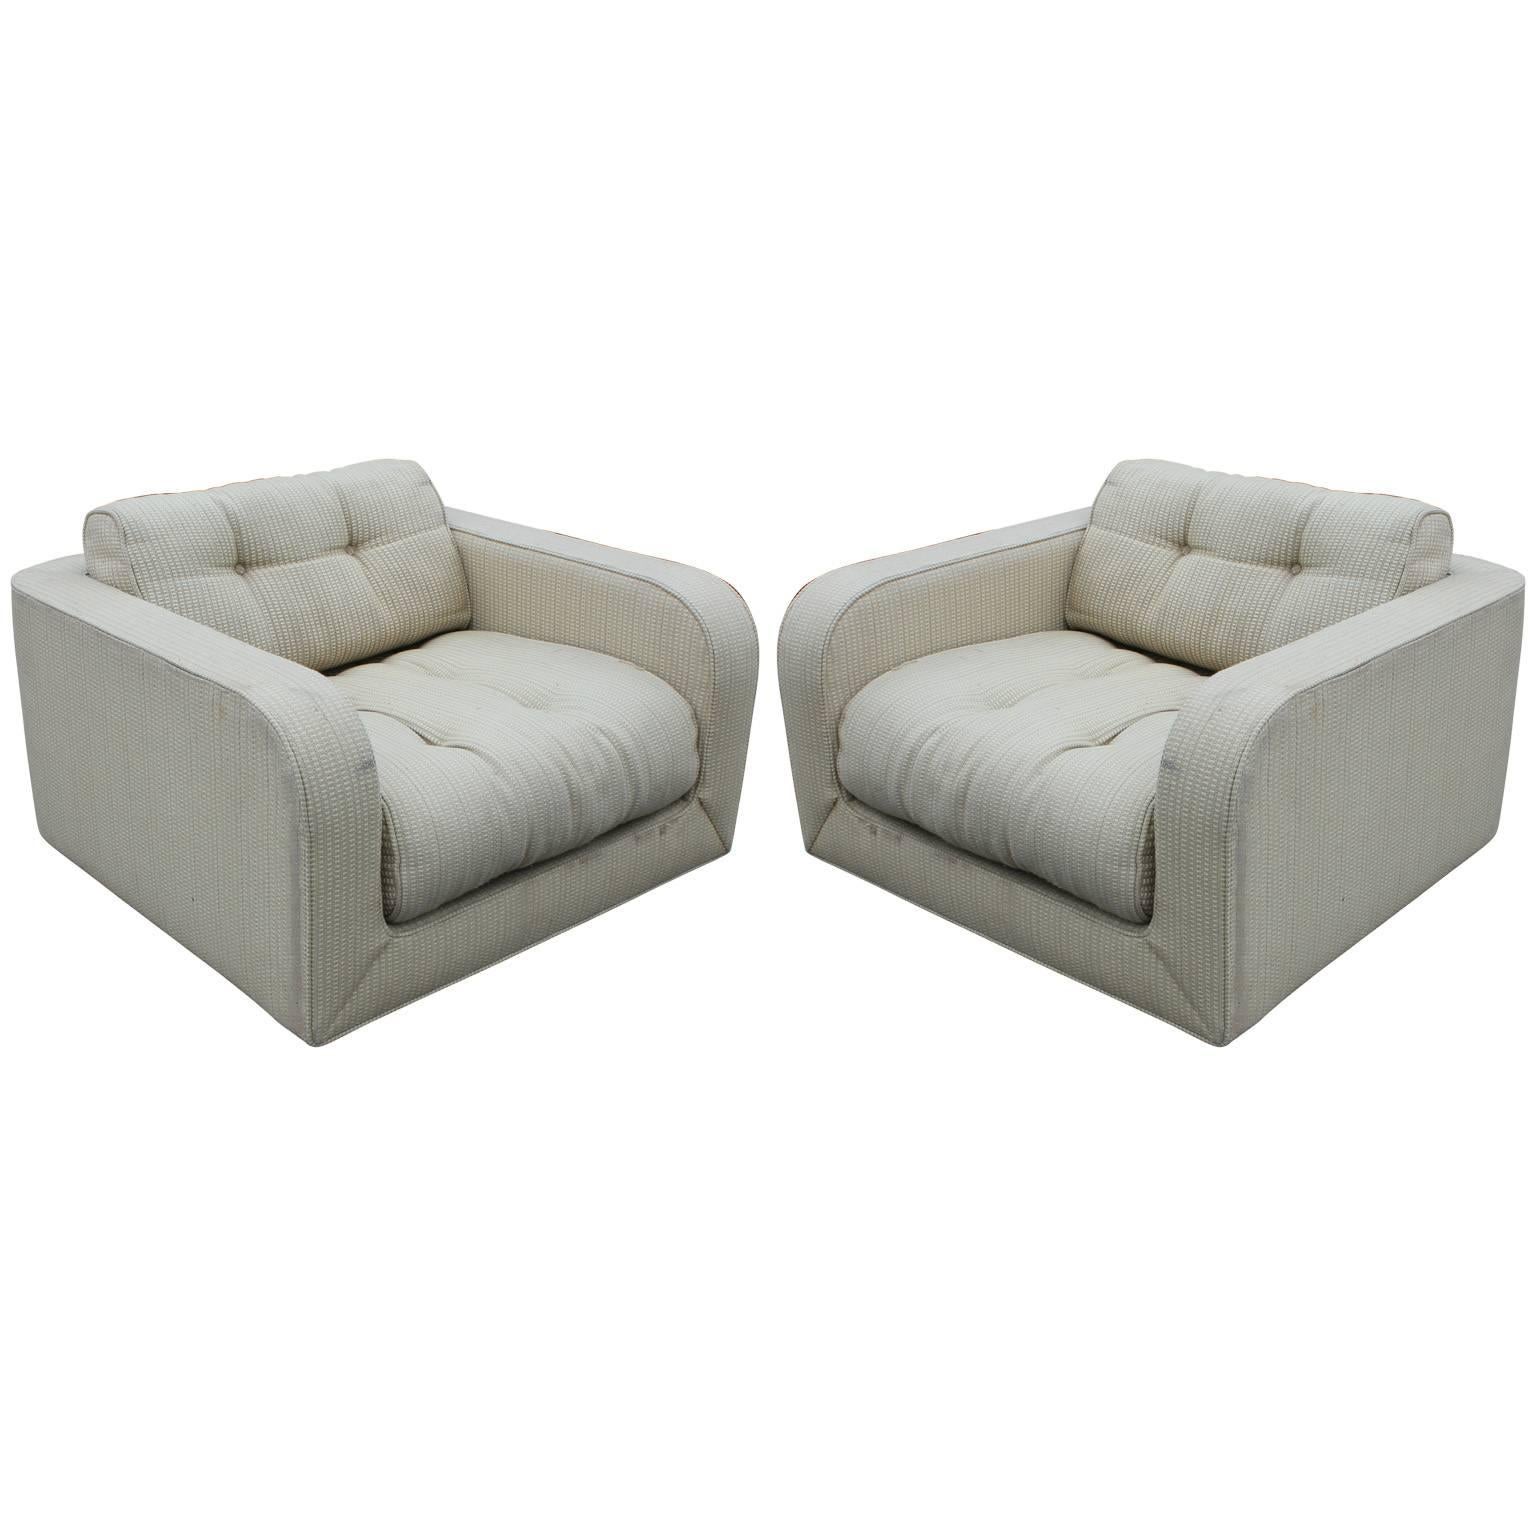 Pair of Modern Clean Lined Oversized Lounge Chairs